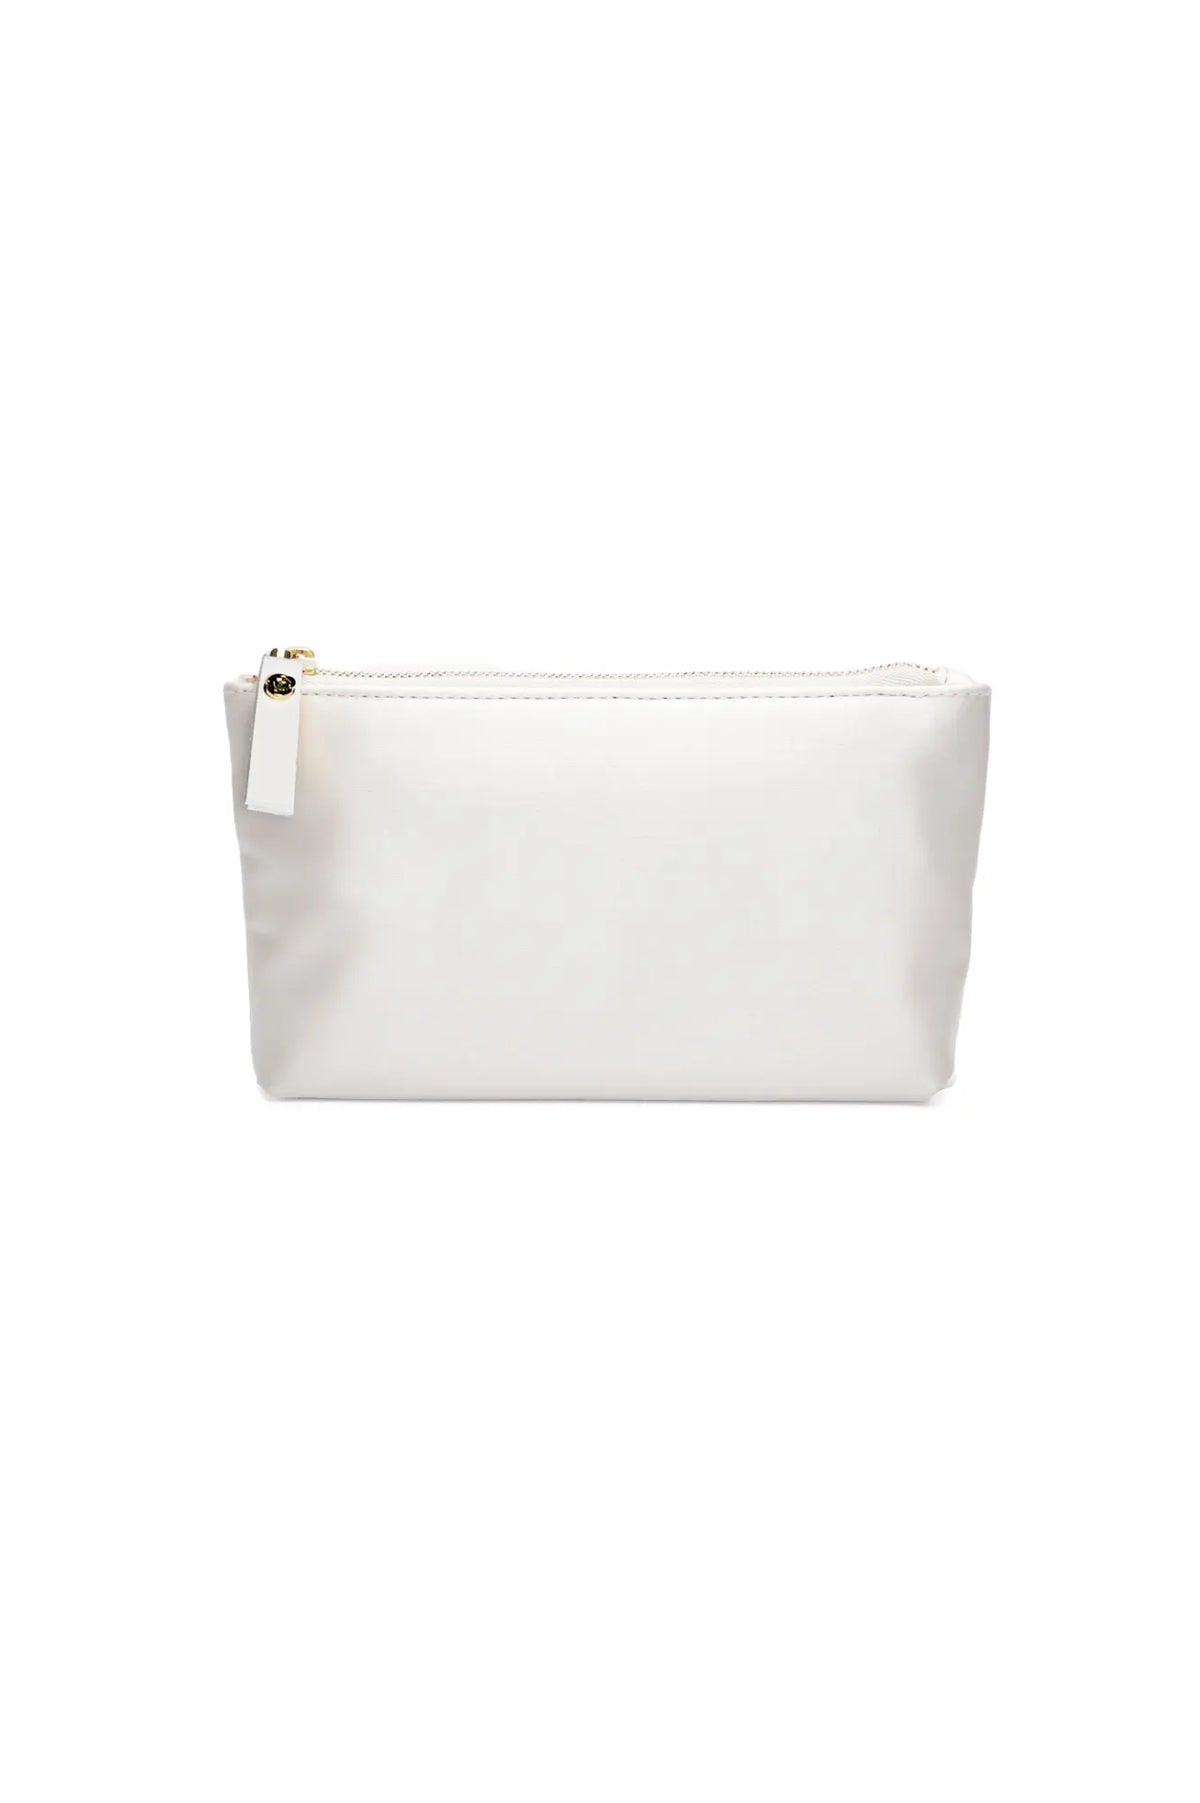 An Italian Mia Acrylic Clutch with Ivory Satin Zipper Pouch isolated on a white background from The Bella Rosa Collection.